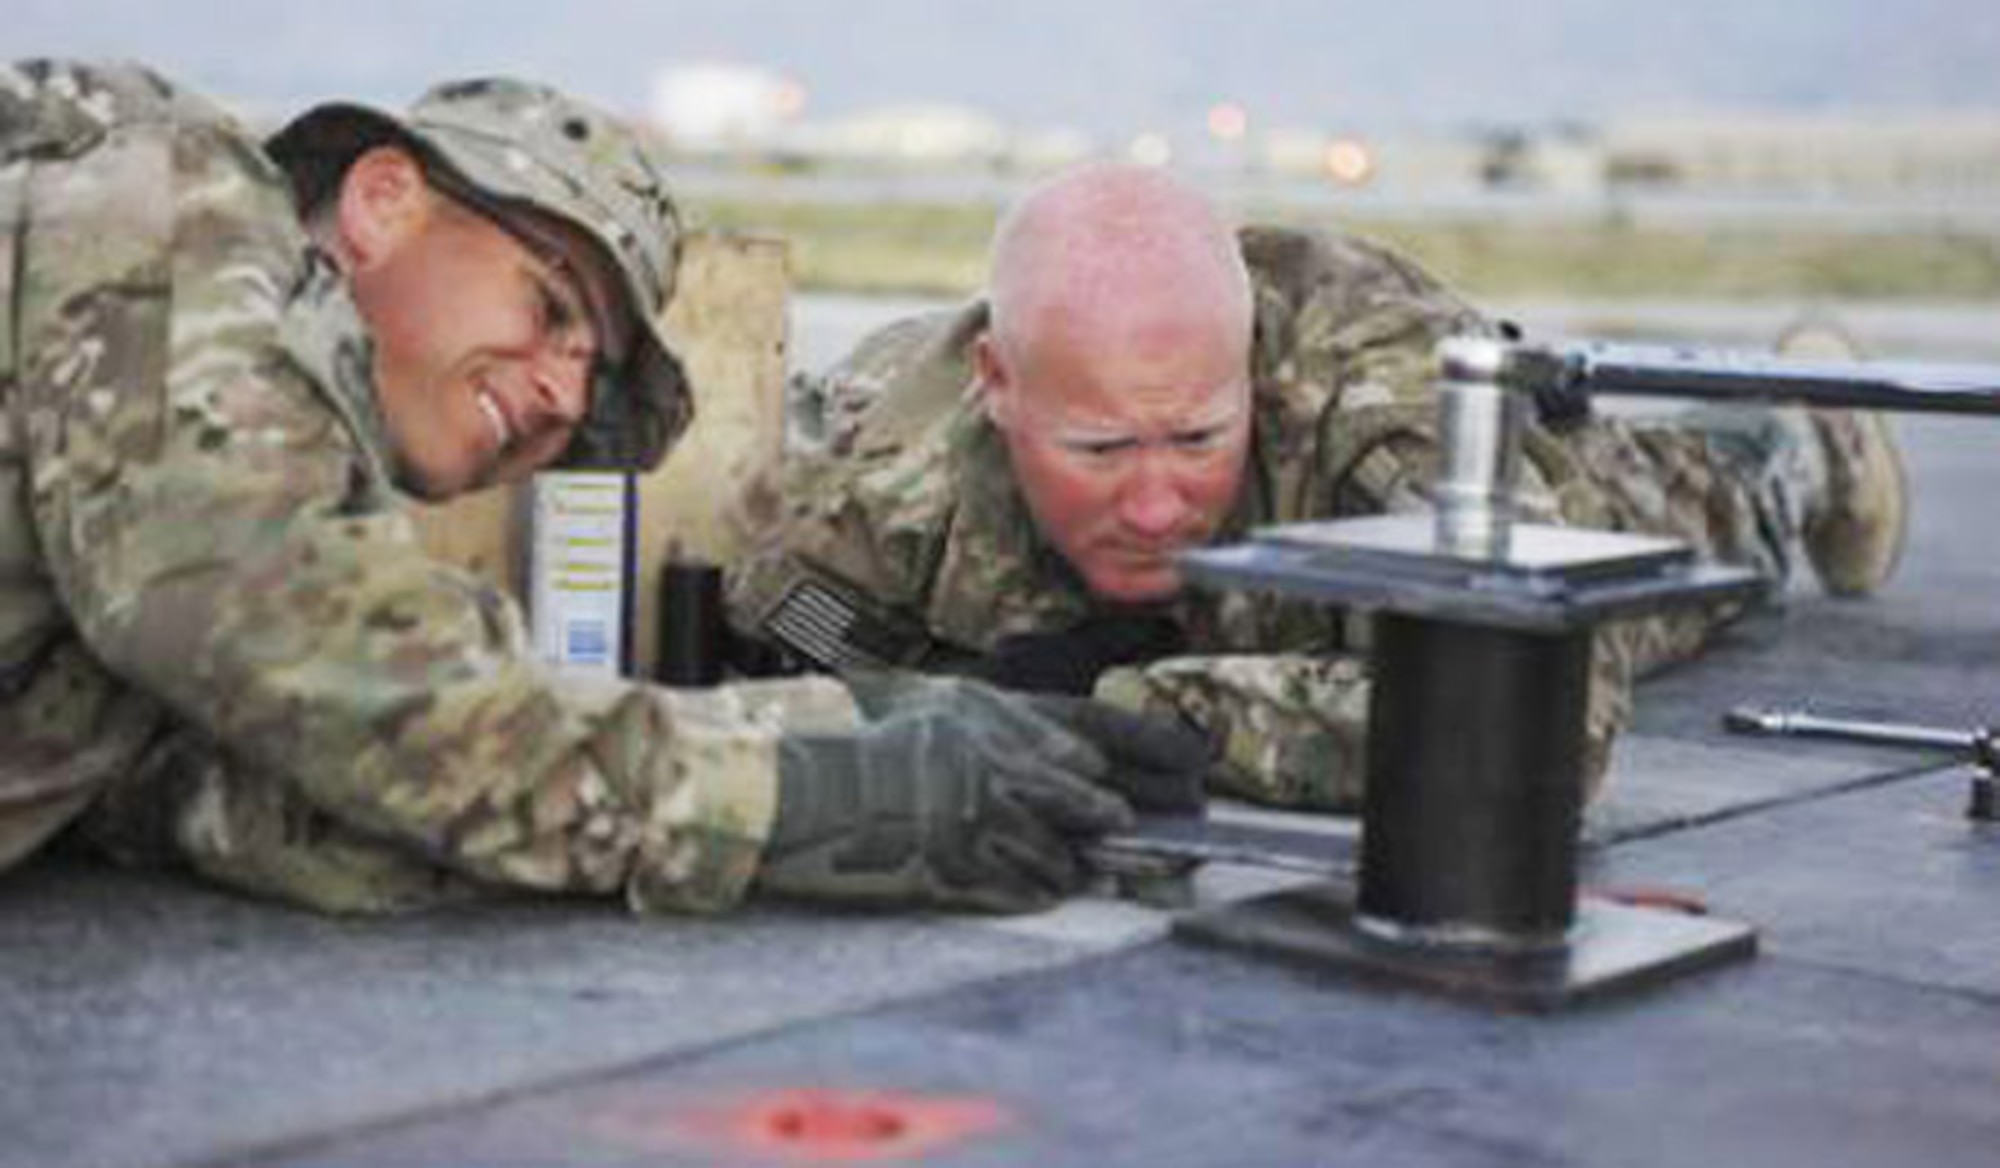 Maj. Ryan Kaspari (left) 455th Expeditionary Civil Engineer Squadron operations chief, and Master Sgt.  Jeremiah Graves, 455th ECES NCO in charge of operations, conduct repairs on the main runway at Bagram Airfield, Afghanistan June 9th, 2014. Kaspari and Graves are natives of Duluth, Minnesota and are deployed from the Air National guards' 148th Fighter Wing, Duluth, Minnesota. (U.S. Air Force photo by Airman 1st Class Bobby Cummings/Released)